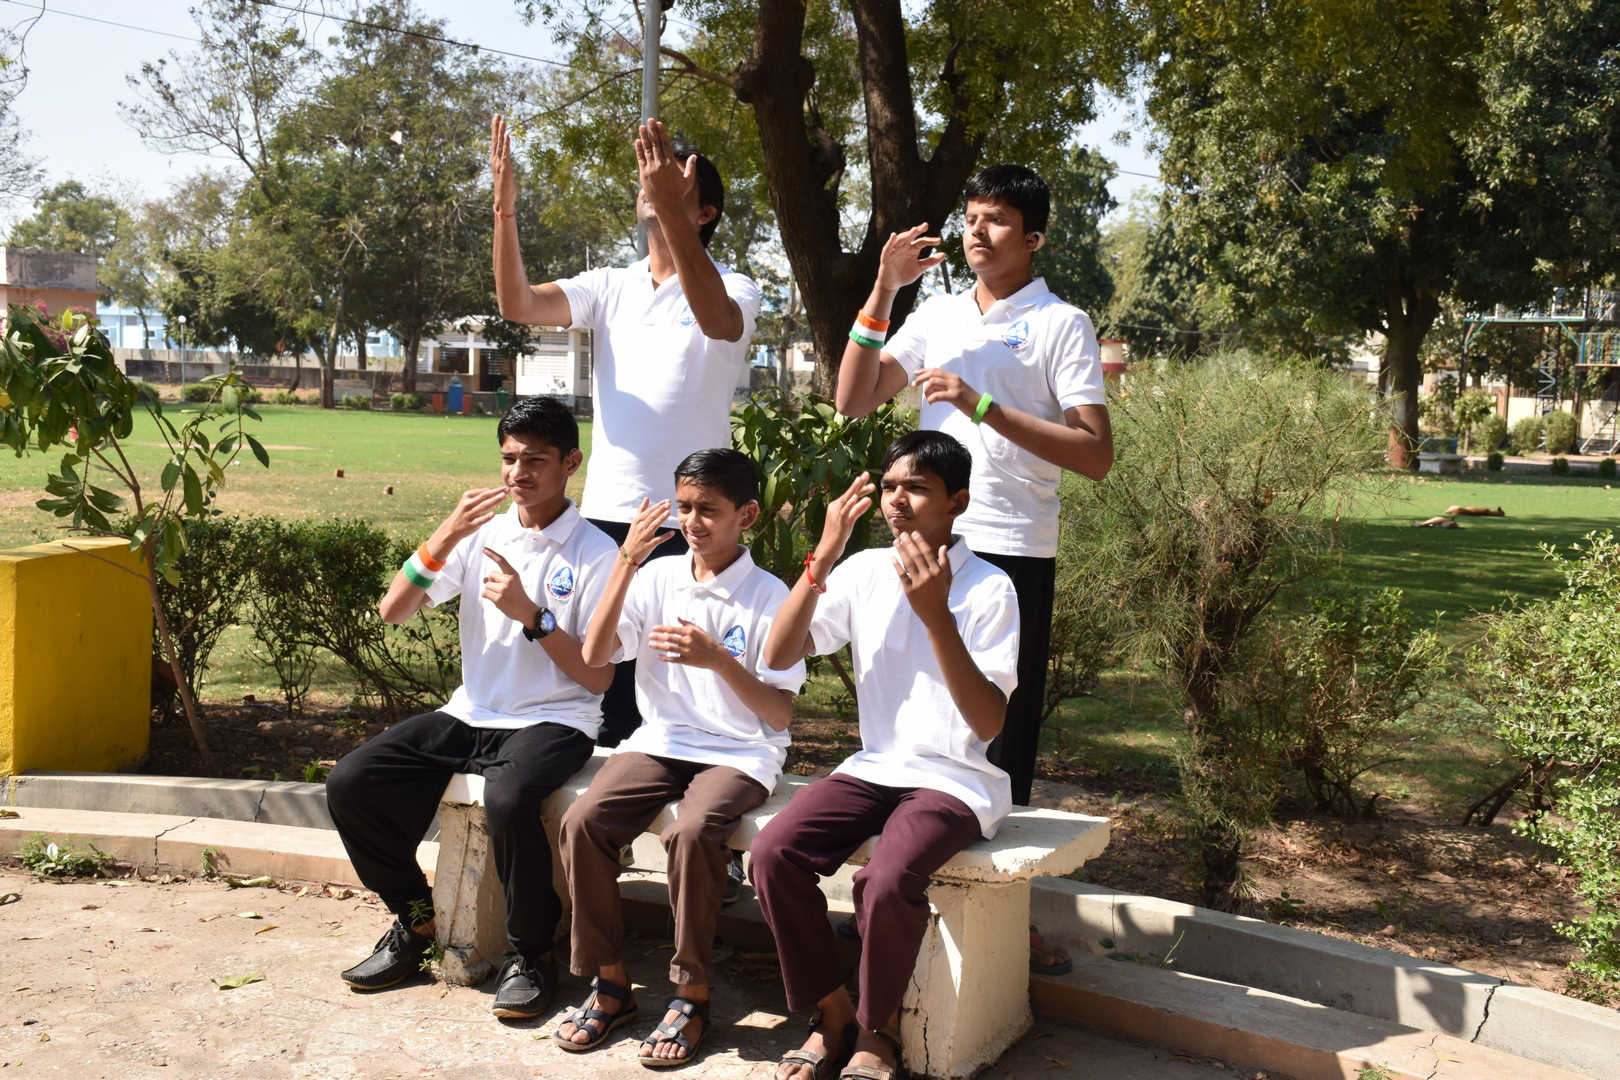 Boys performing video album inspirational songs in sign language